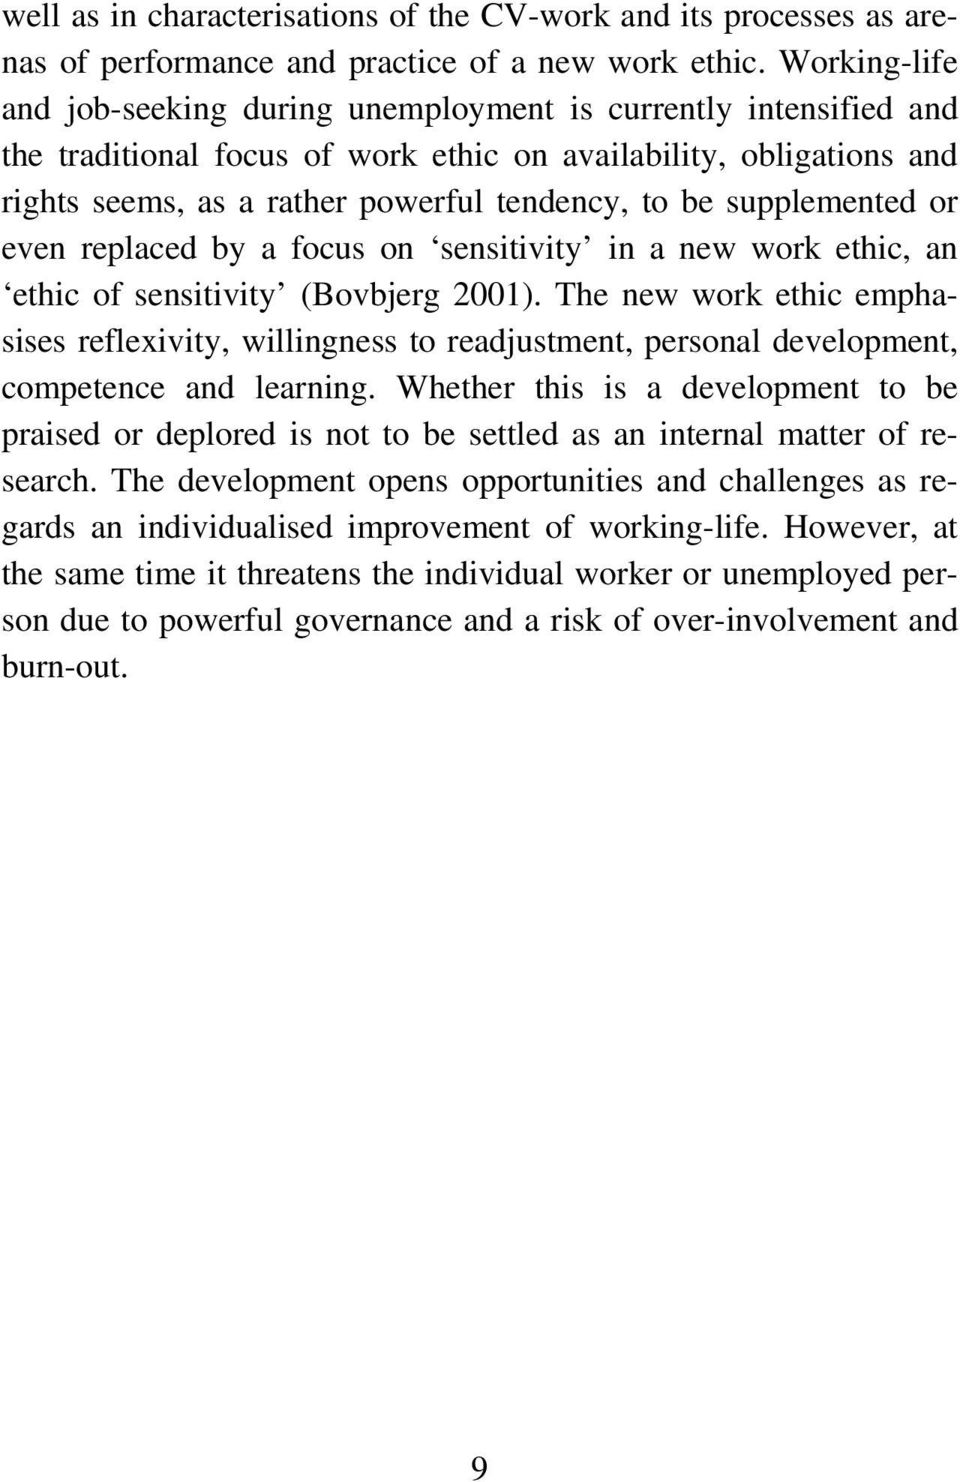 supplemented or even replaced by a focus on sensitivity in a new work ethic, an ethic of sensitivity (Bovbjerg 2001).